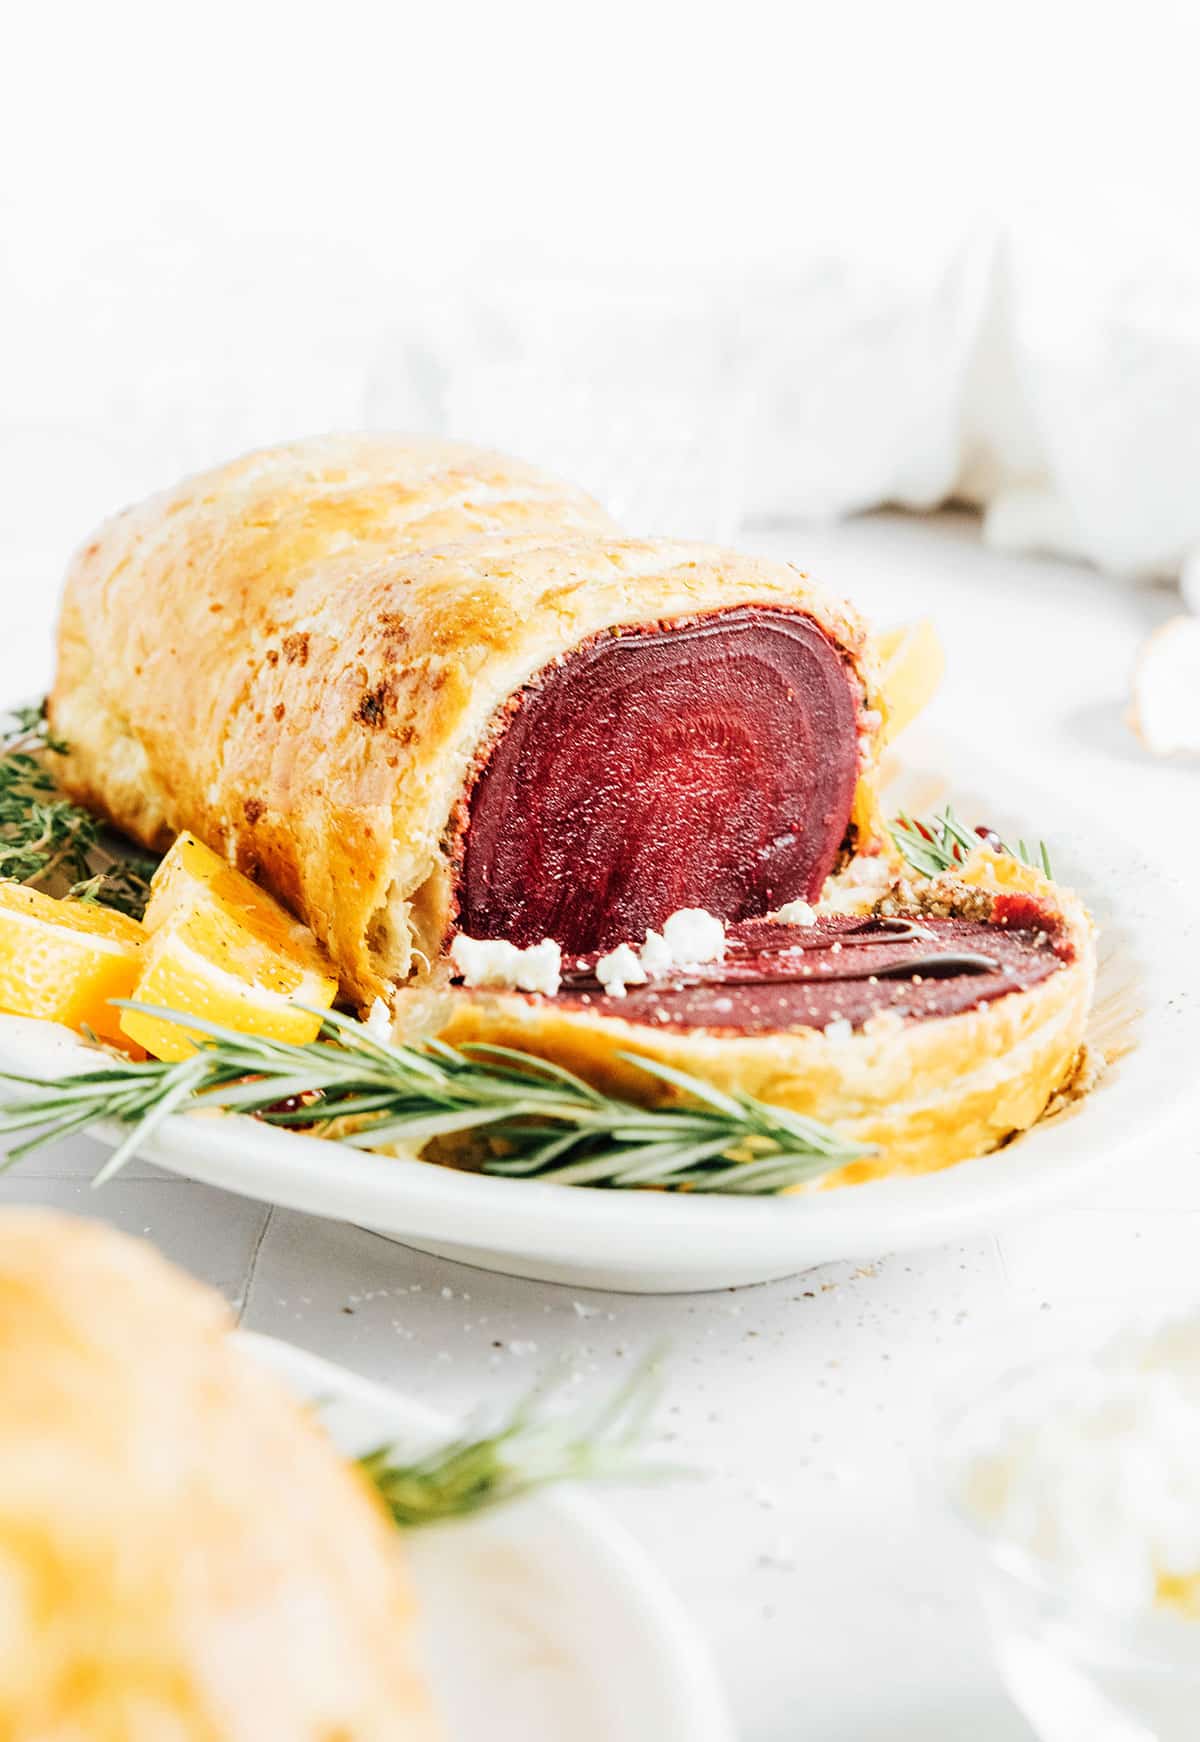 Vegan beet wellington on a serving platter next to rosemary and oranges.